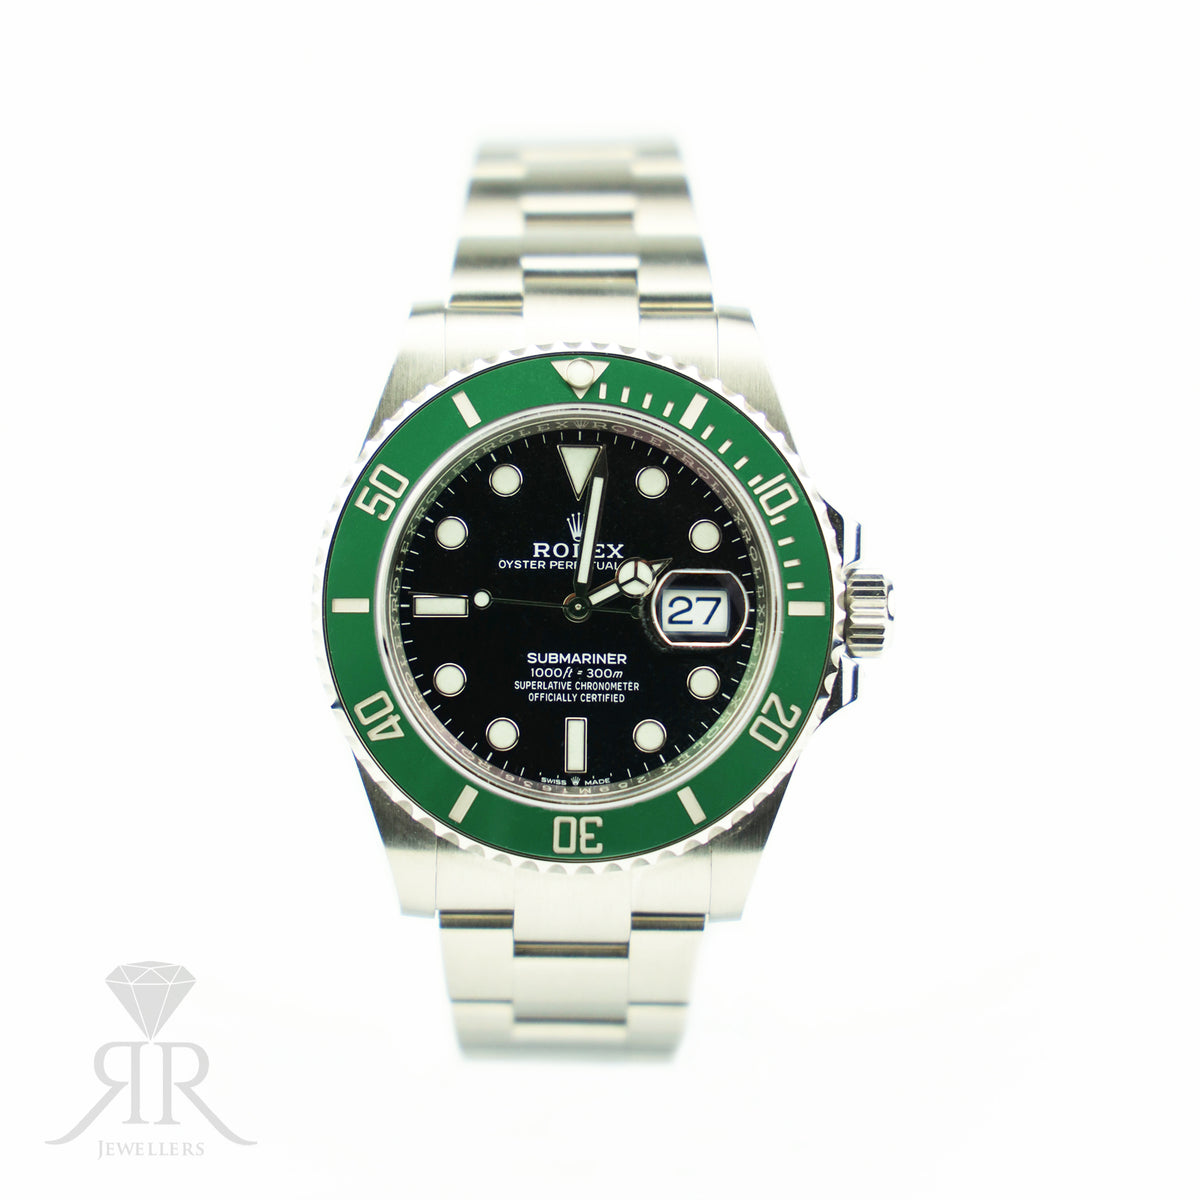 Rolex SUBMARINER DATE Oyster, 41 mm, Oystersteel, M126610LV-0002 Starbucks - RR JEWELLERS